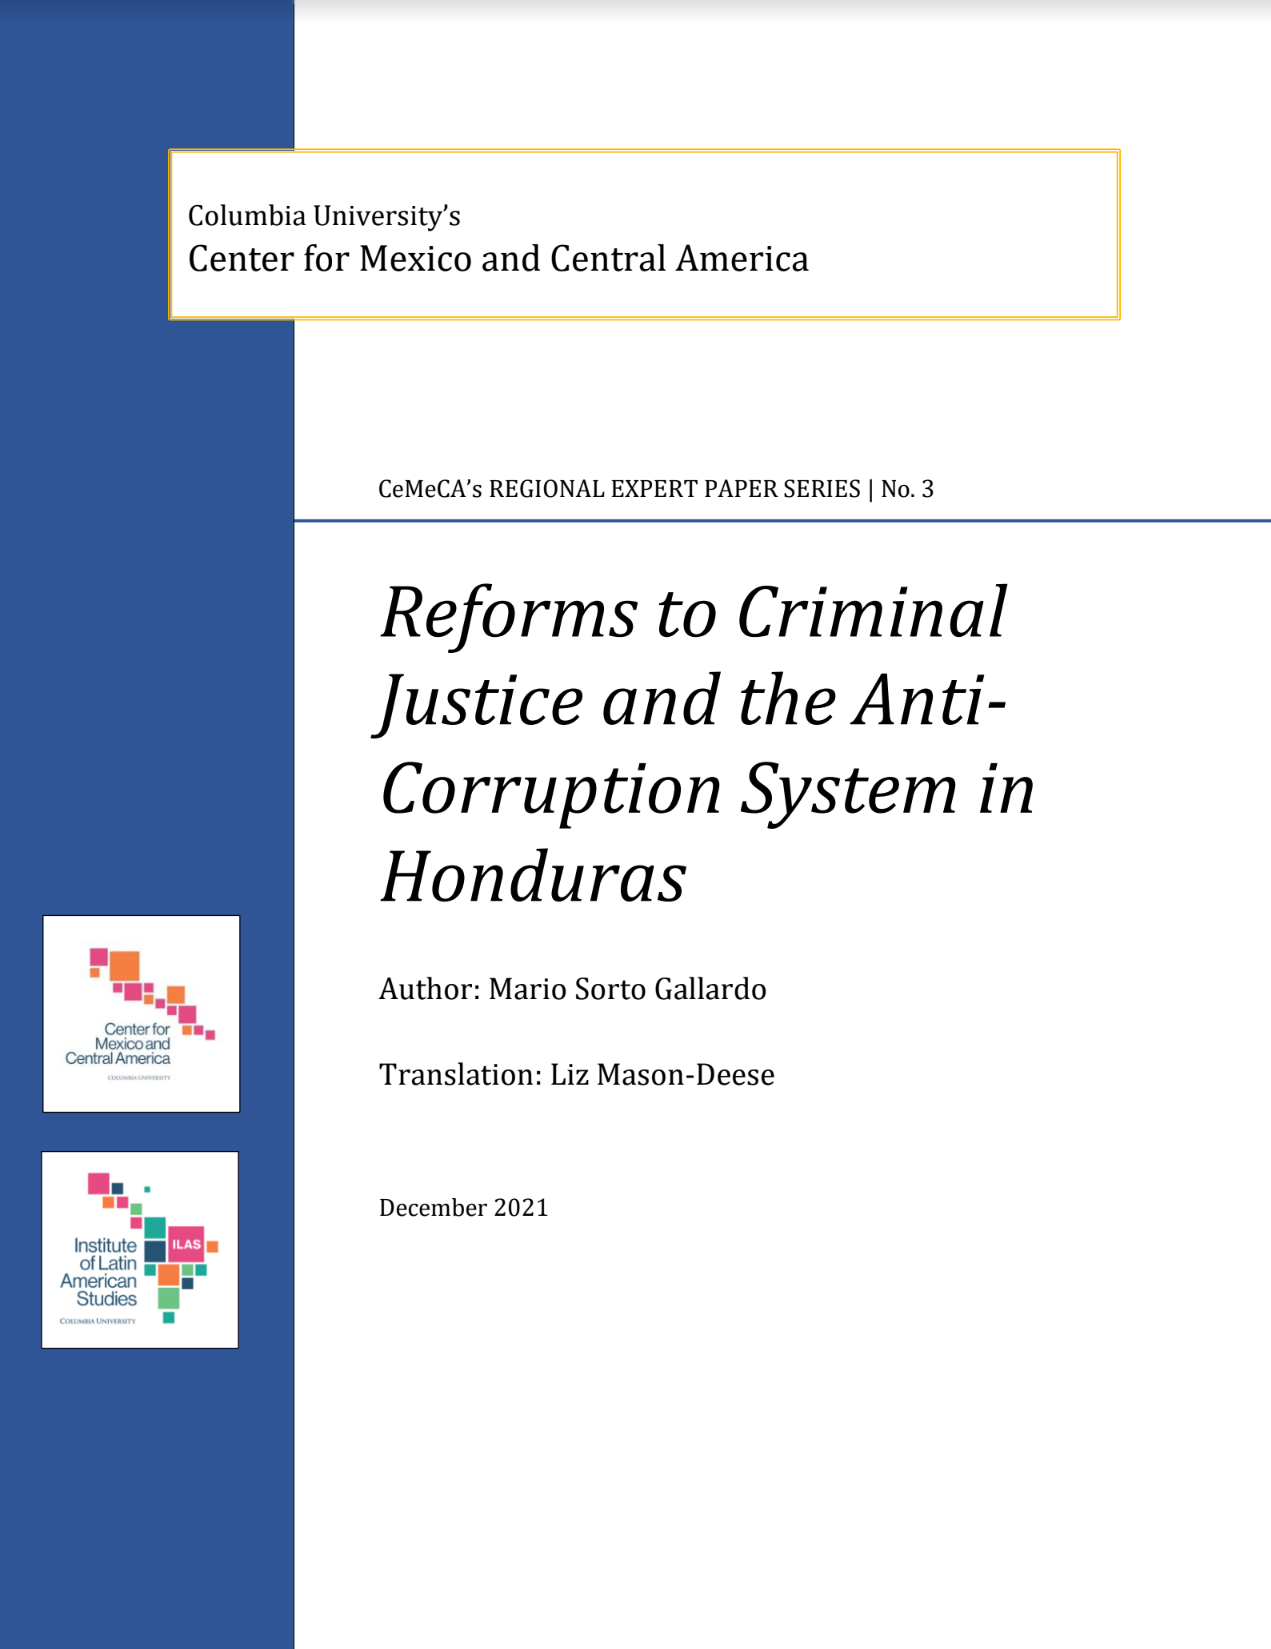 Cover: Reforms to Criminal Justice and the Anti-Corruption System in Honduras